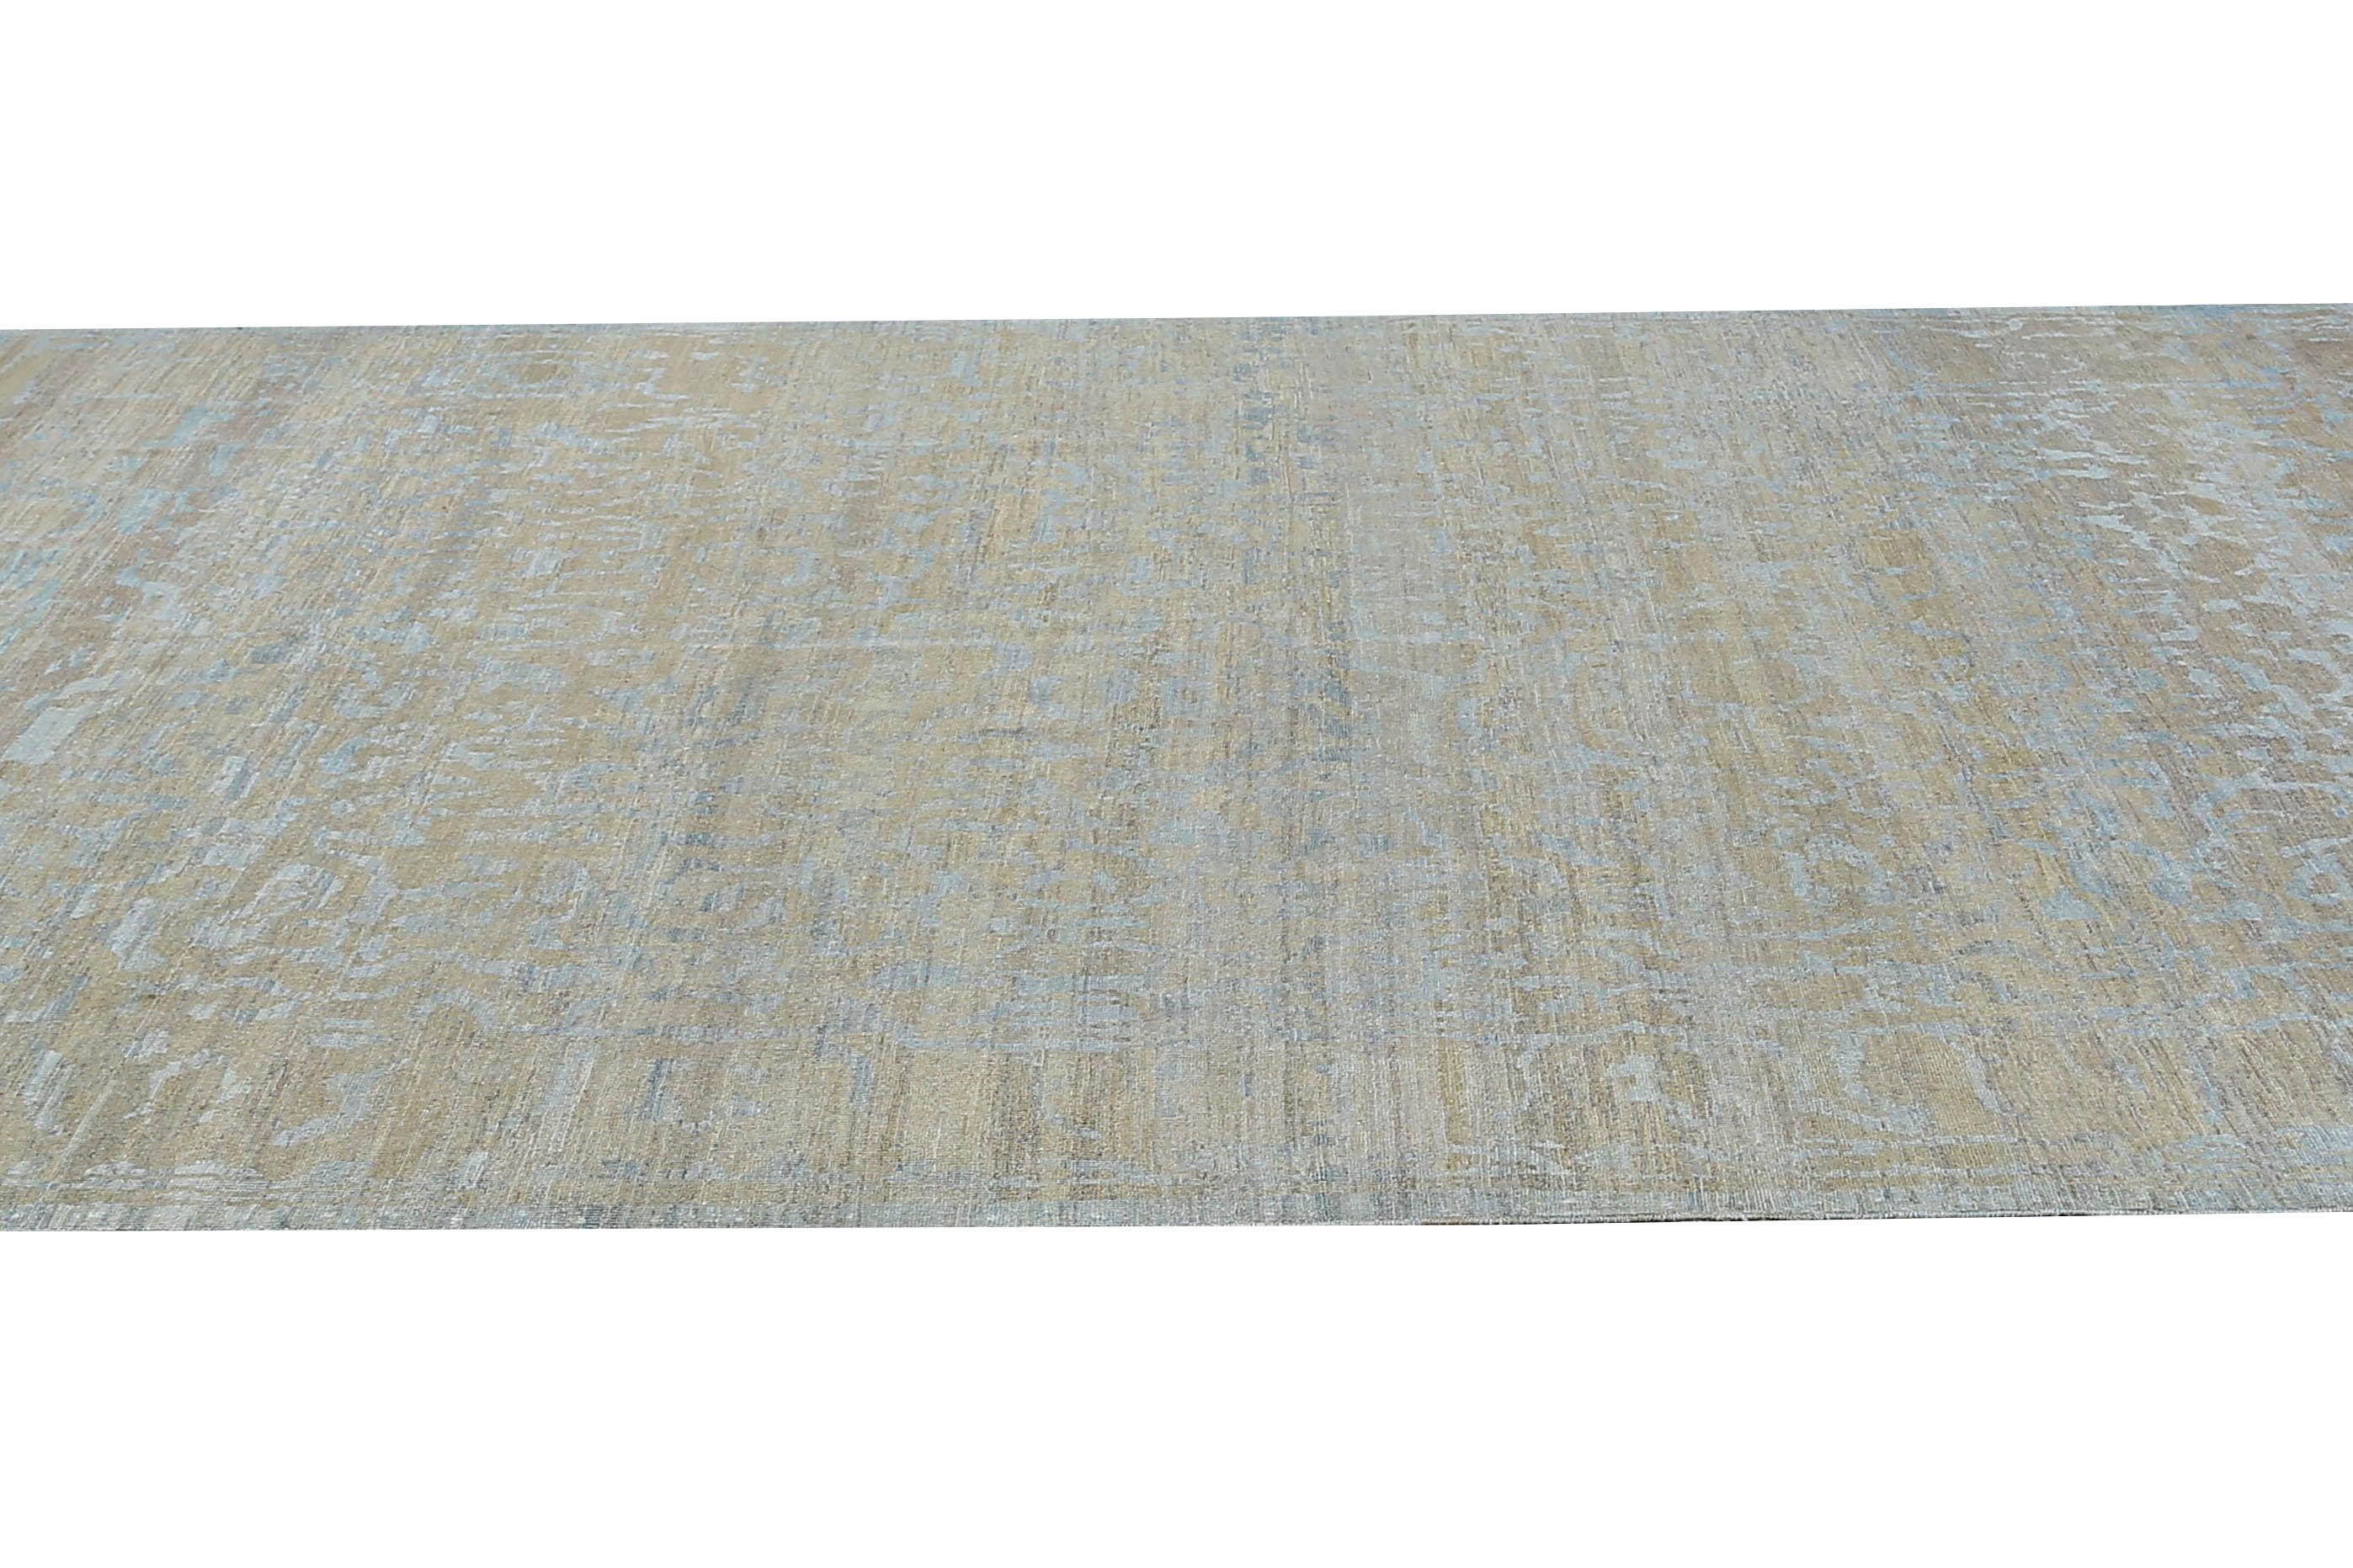 Our Turkish Sultanabad rug in the size of 10'2'' x 14'0'' is a subtle yet sophisticated piece that will complement any decor. Handcrafted by skilled artisans using high-quality wool, this rug features muted blue and grey tones, creating a calming